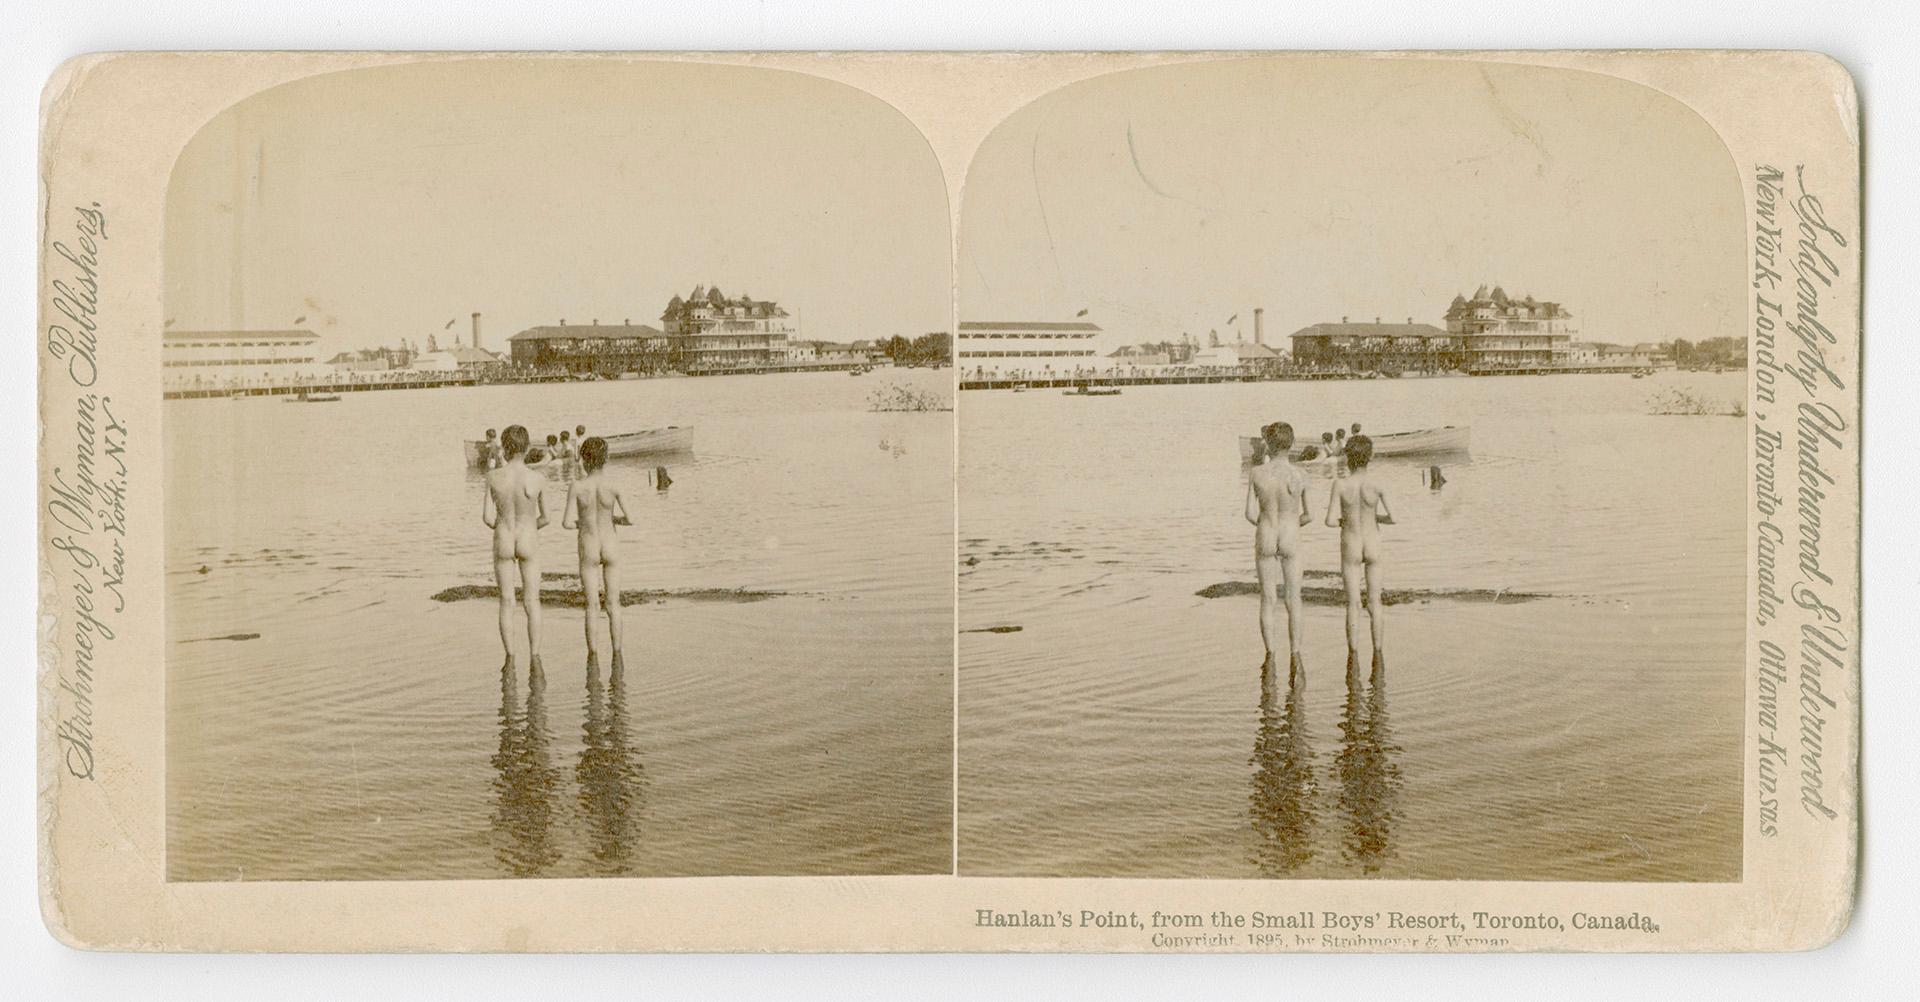 Pictures show two naked small boys watching a boat on the water with buildings on the far side.